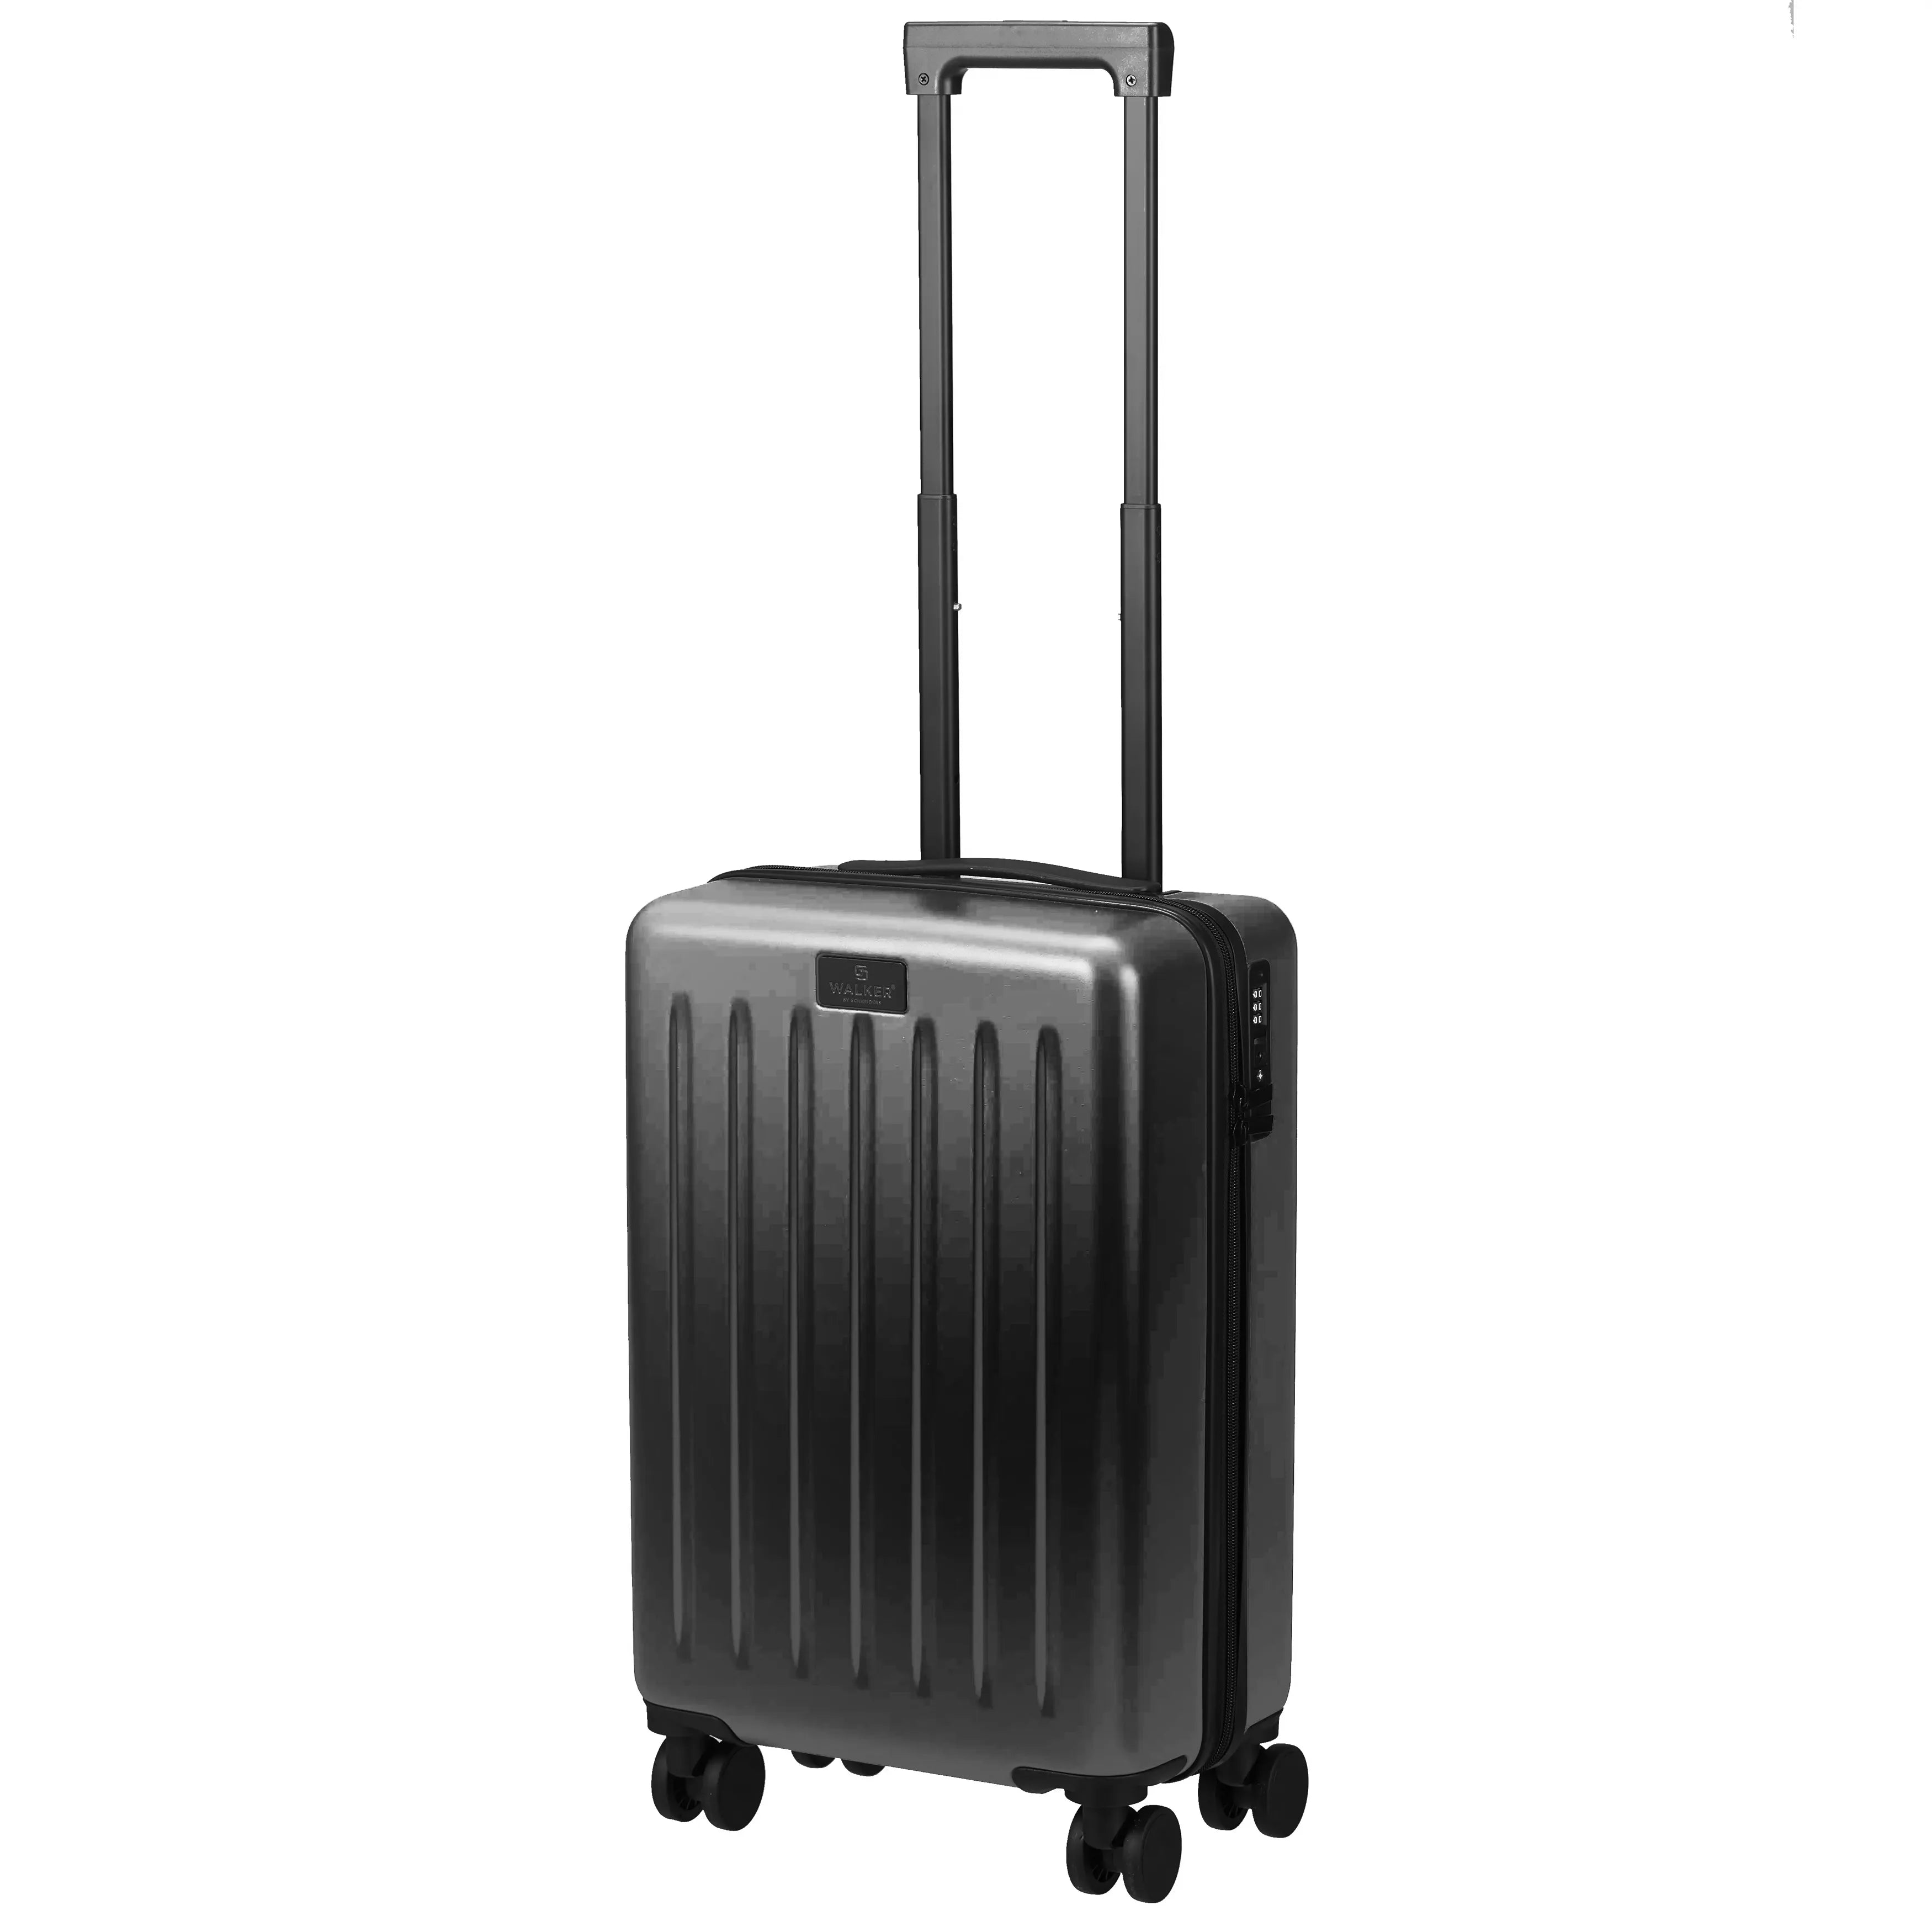 Valise cabine 4 roues Walker Florida 55 cm - Anthracite